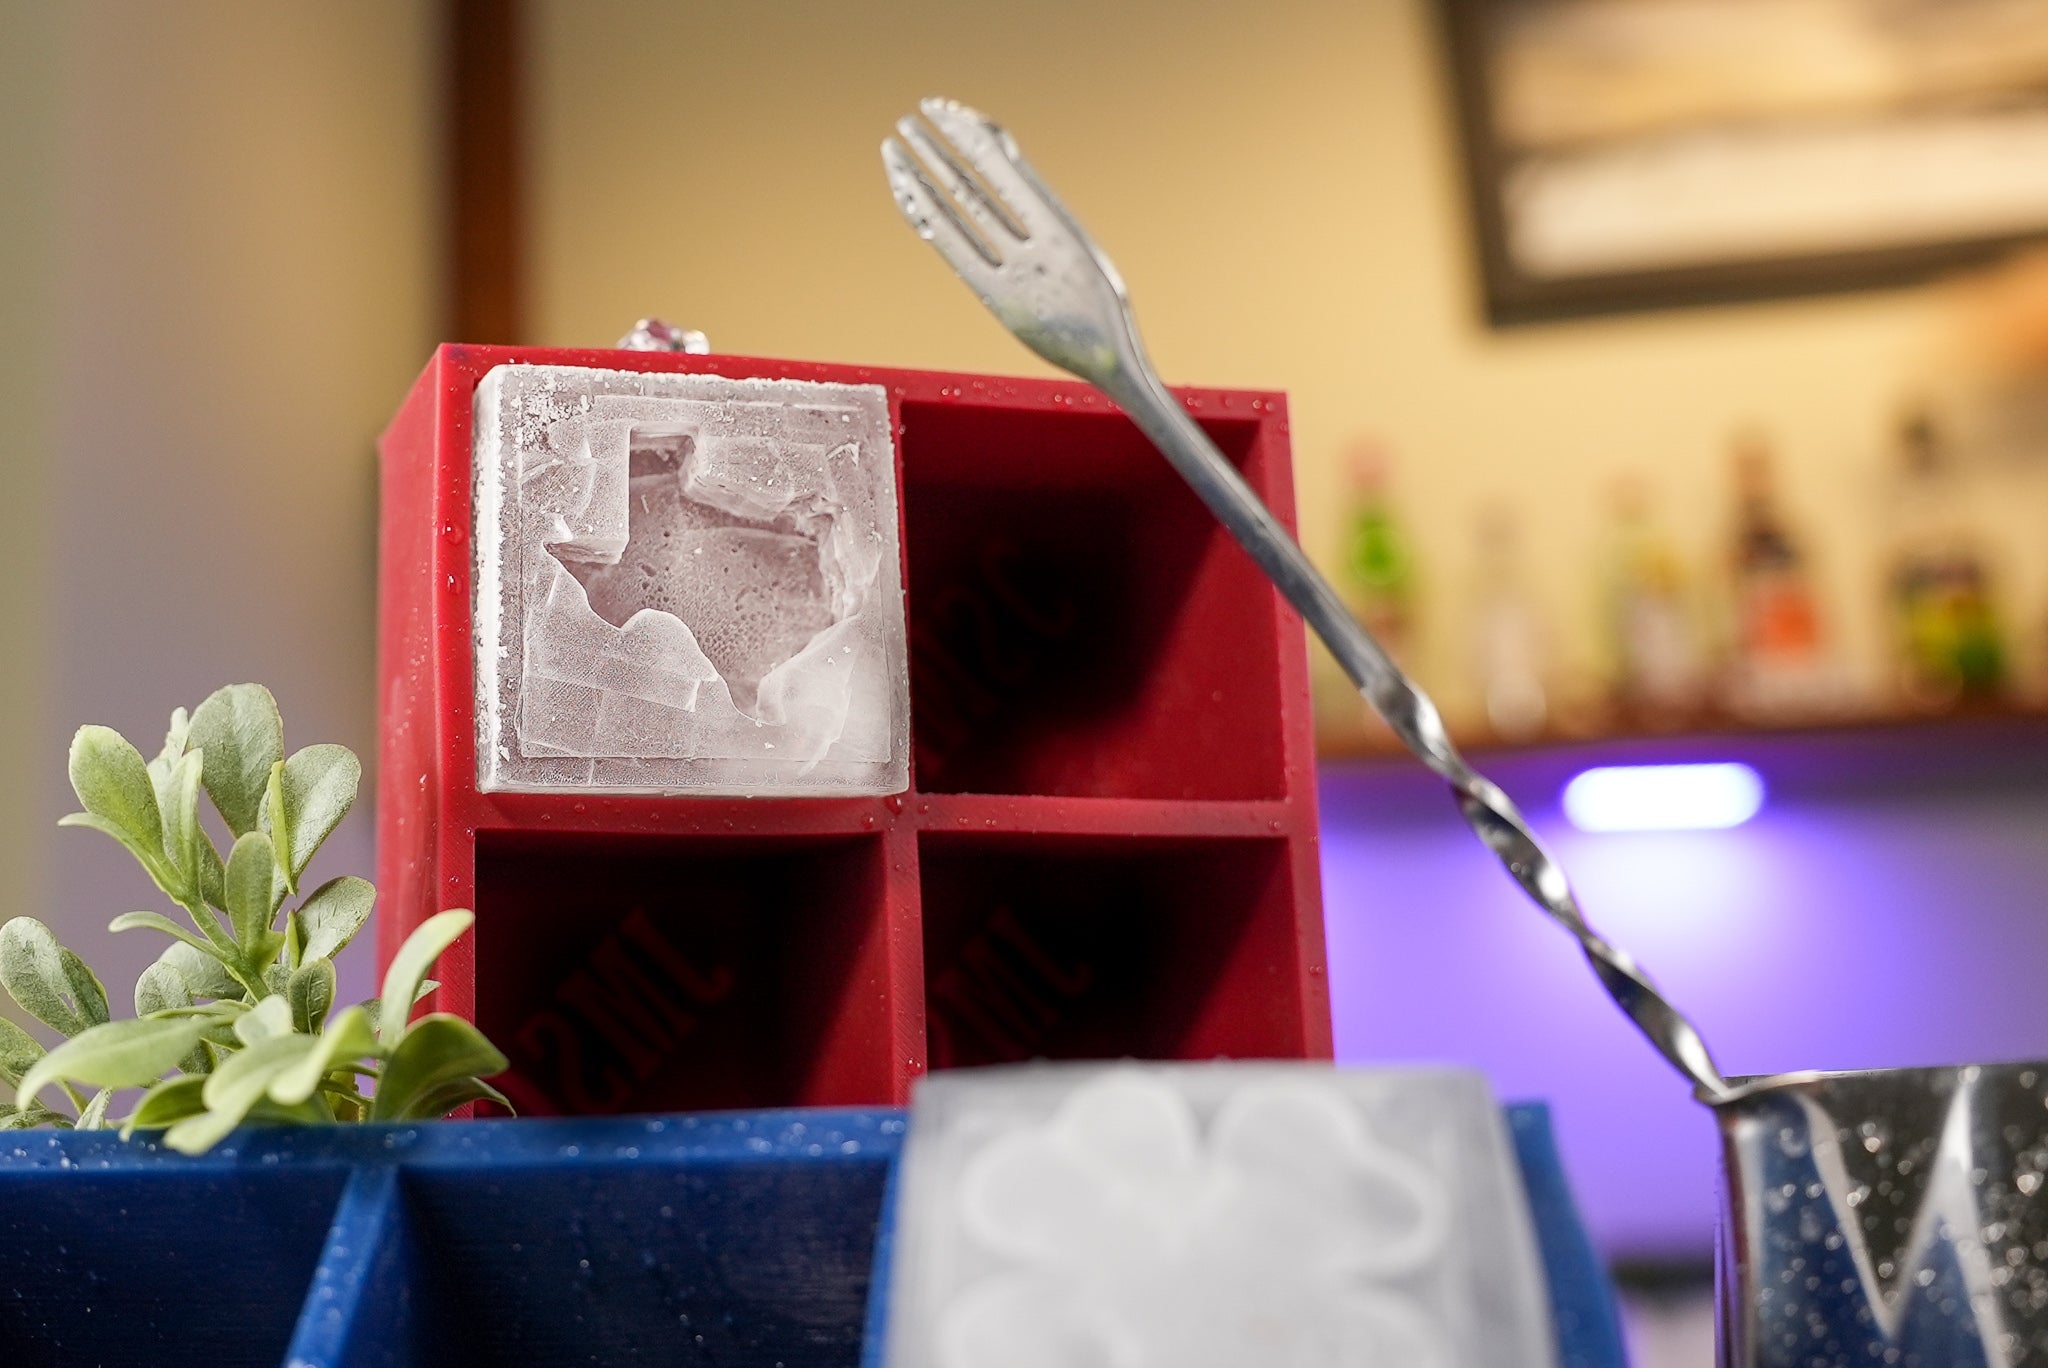 Inverted State Ice Cube Tray – Siligrams